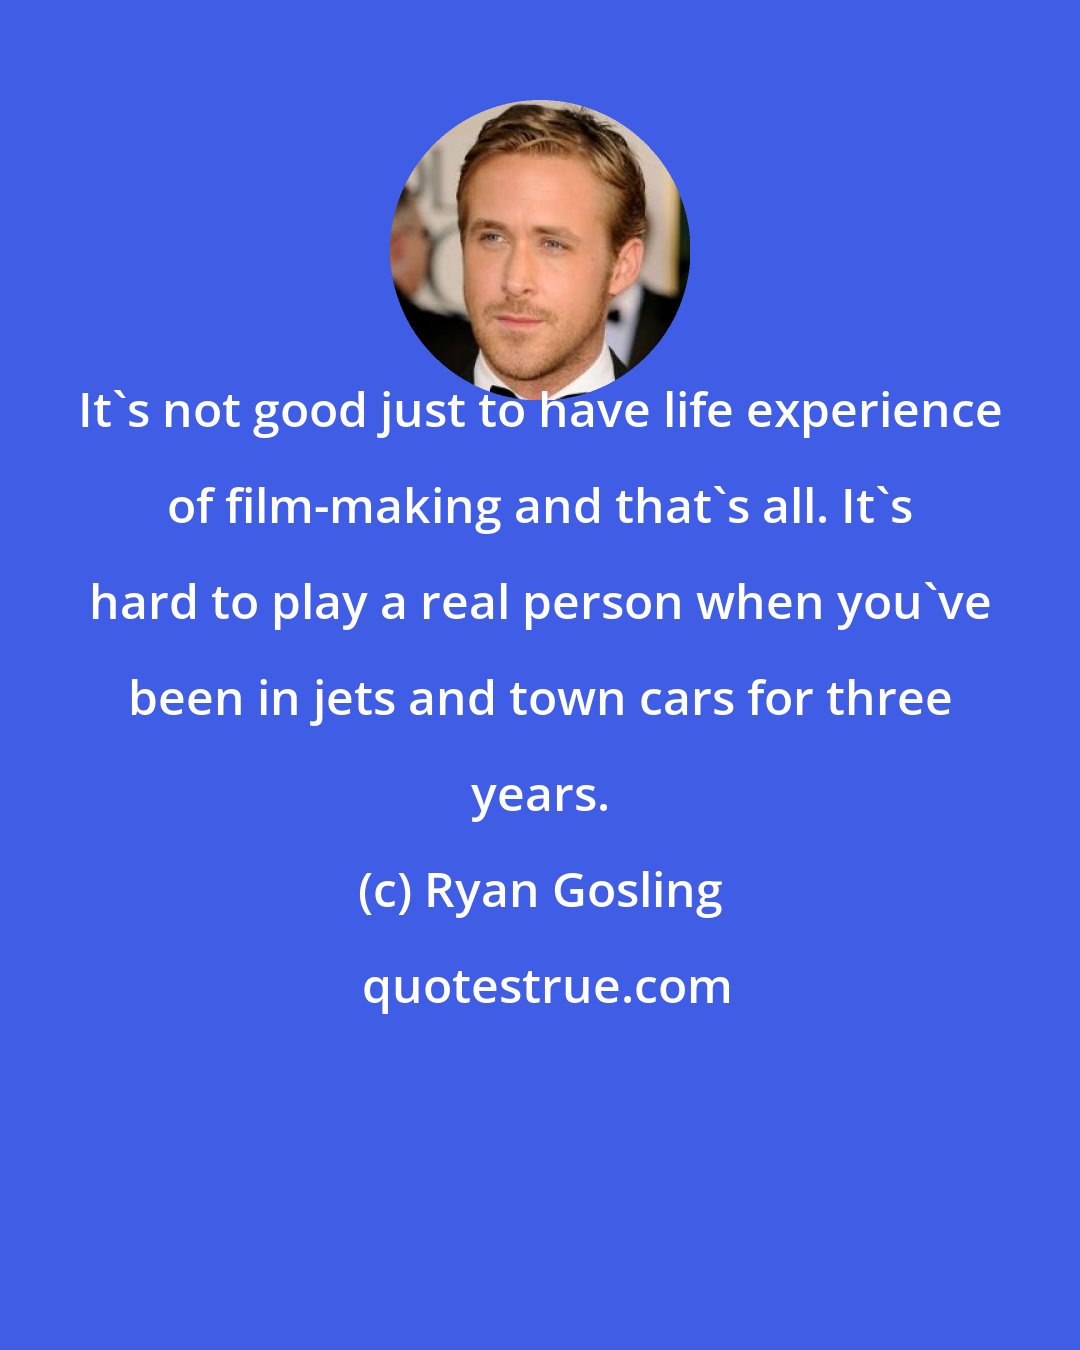 Ryan Gosling: It's not good just to have life experience of film-making and that's all. It's hard to play a real person when you've been in jets and town cars for three years.